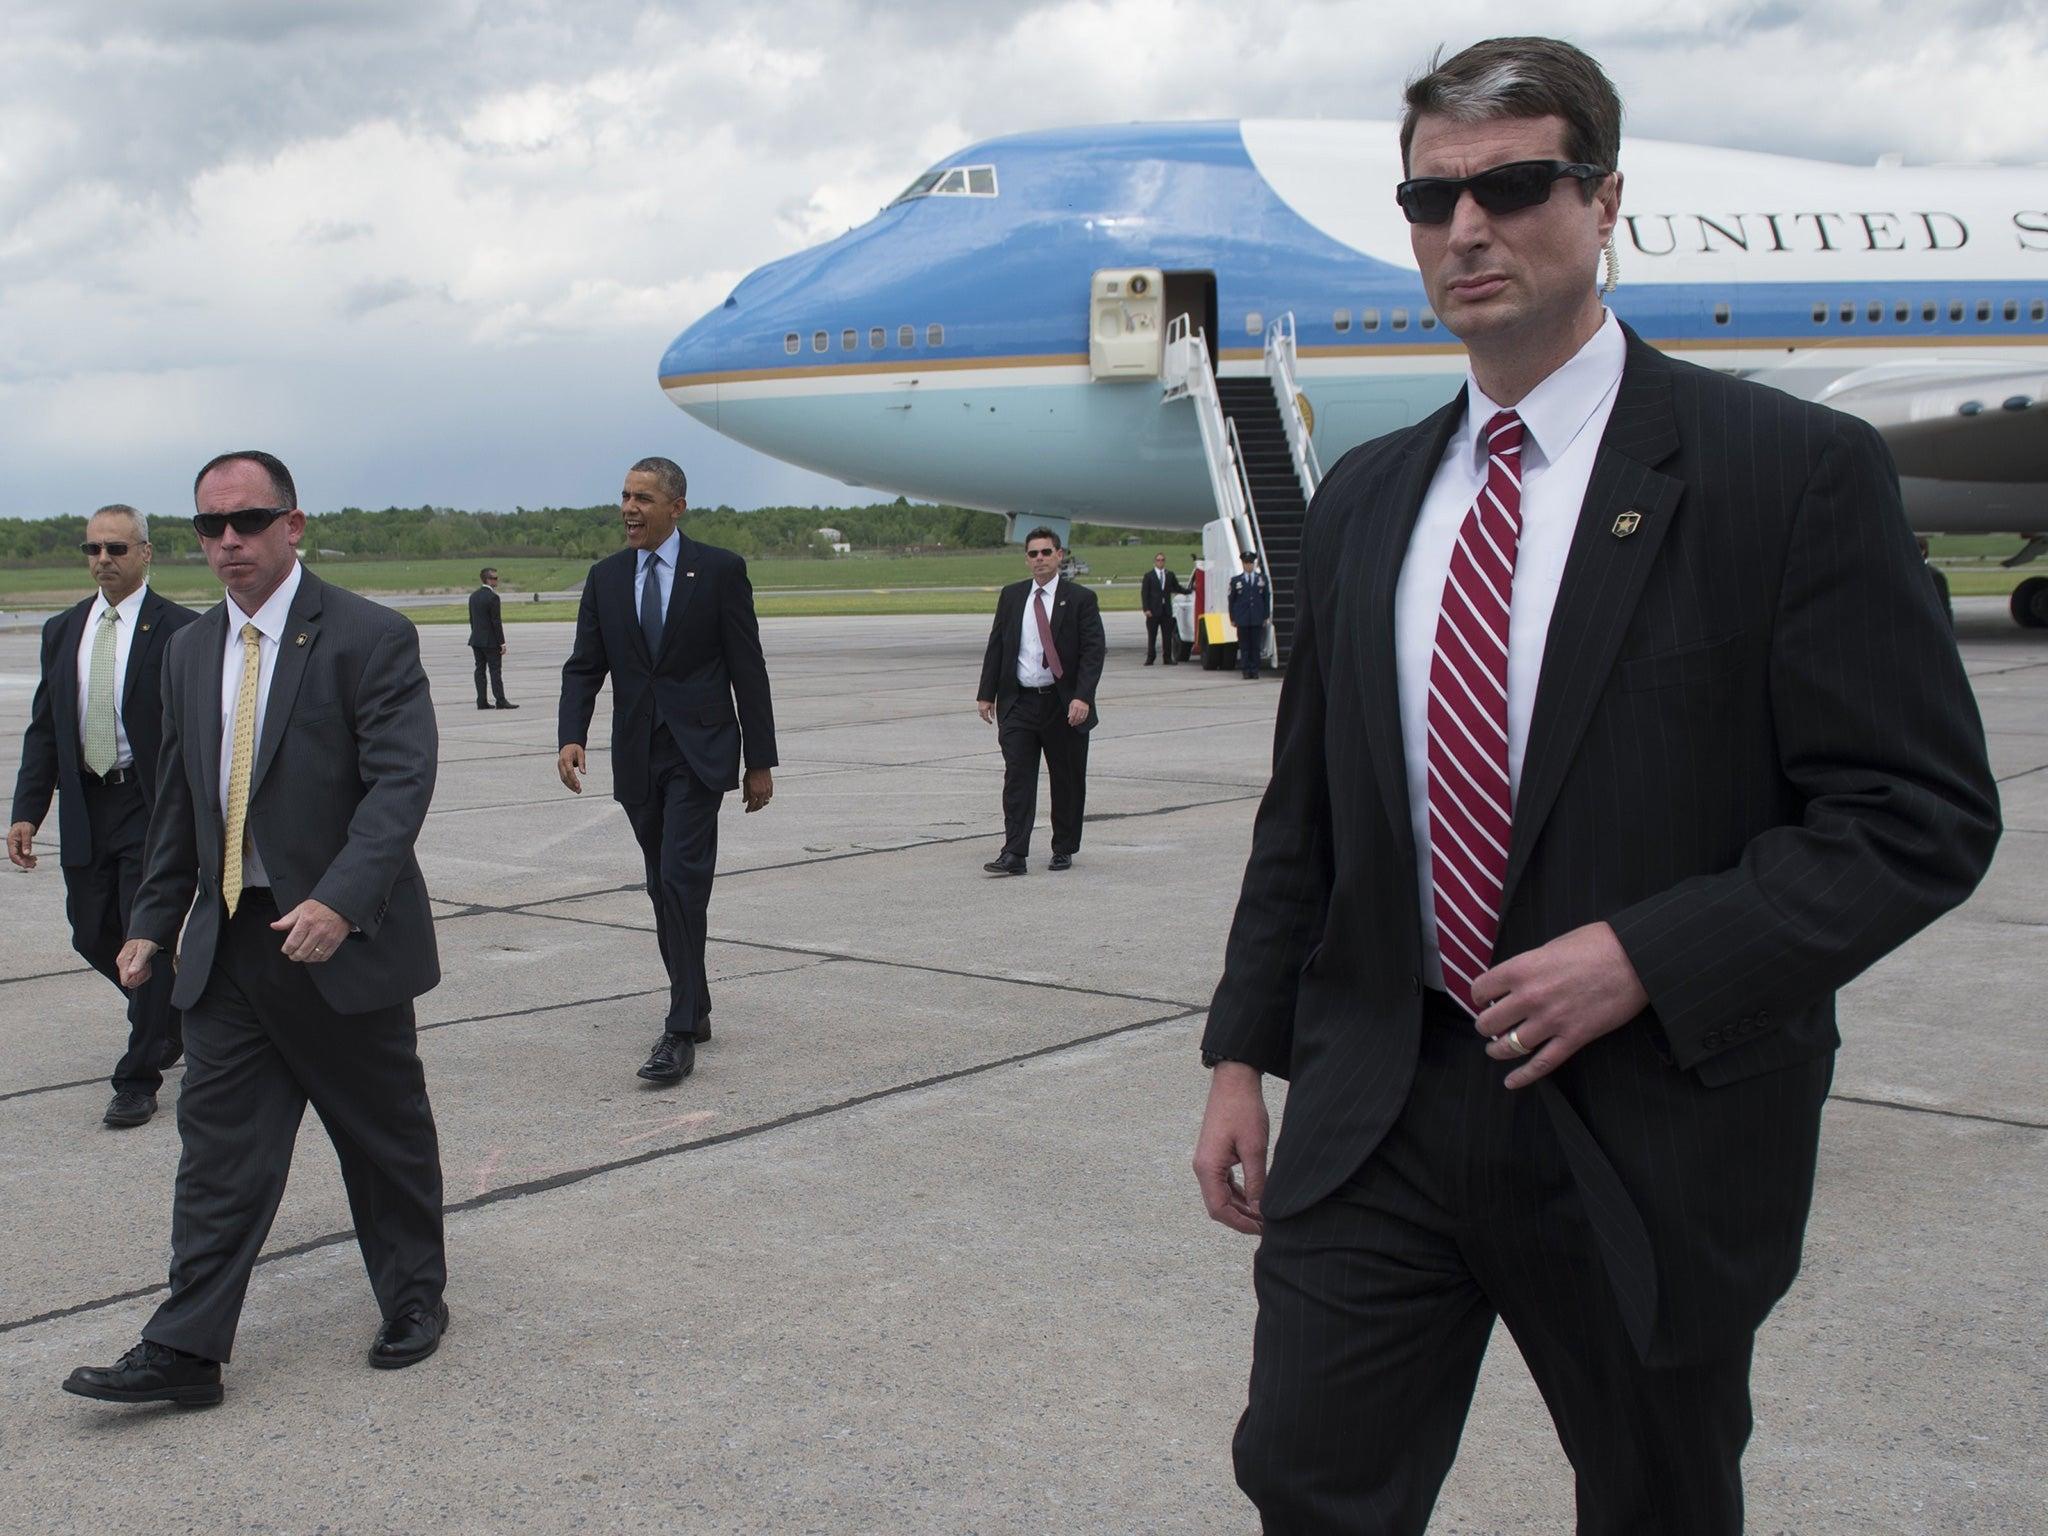 The US Secret Service are now more House of Cards than real